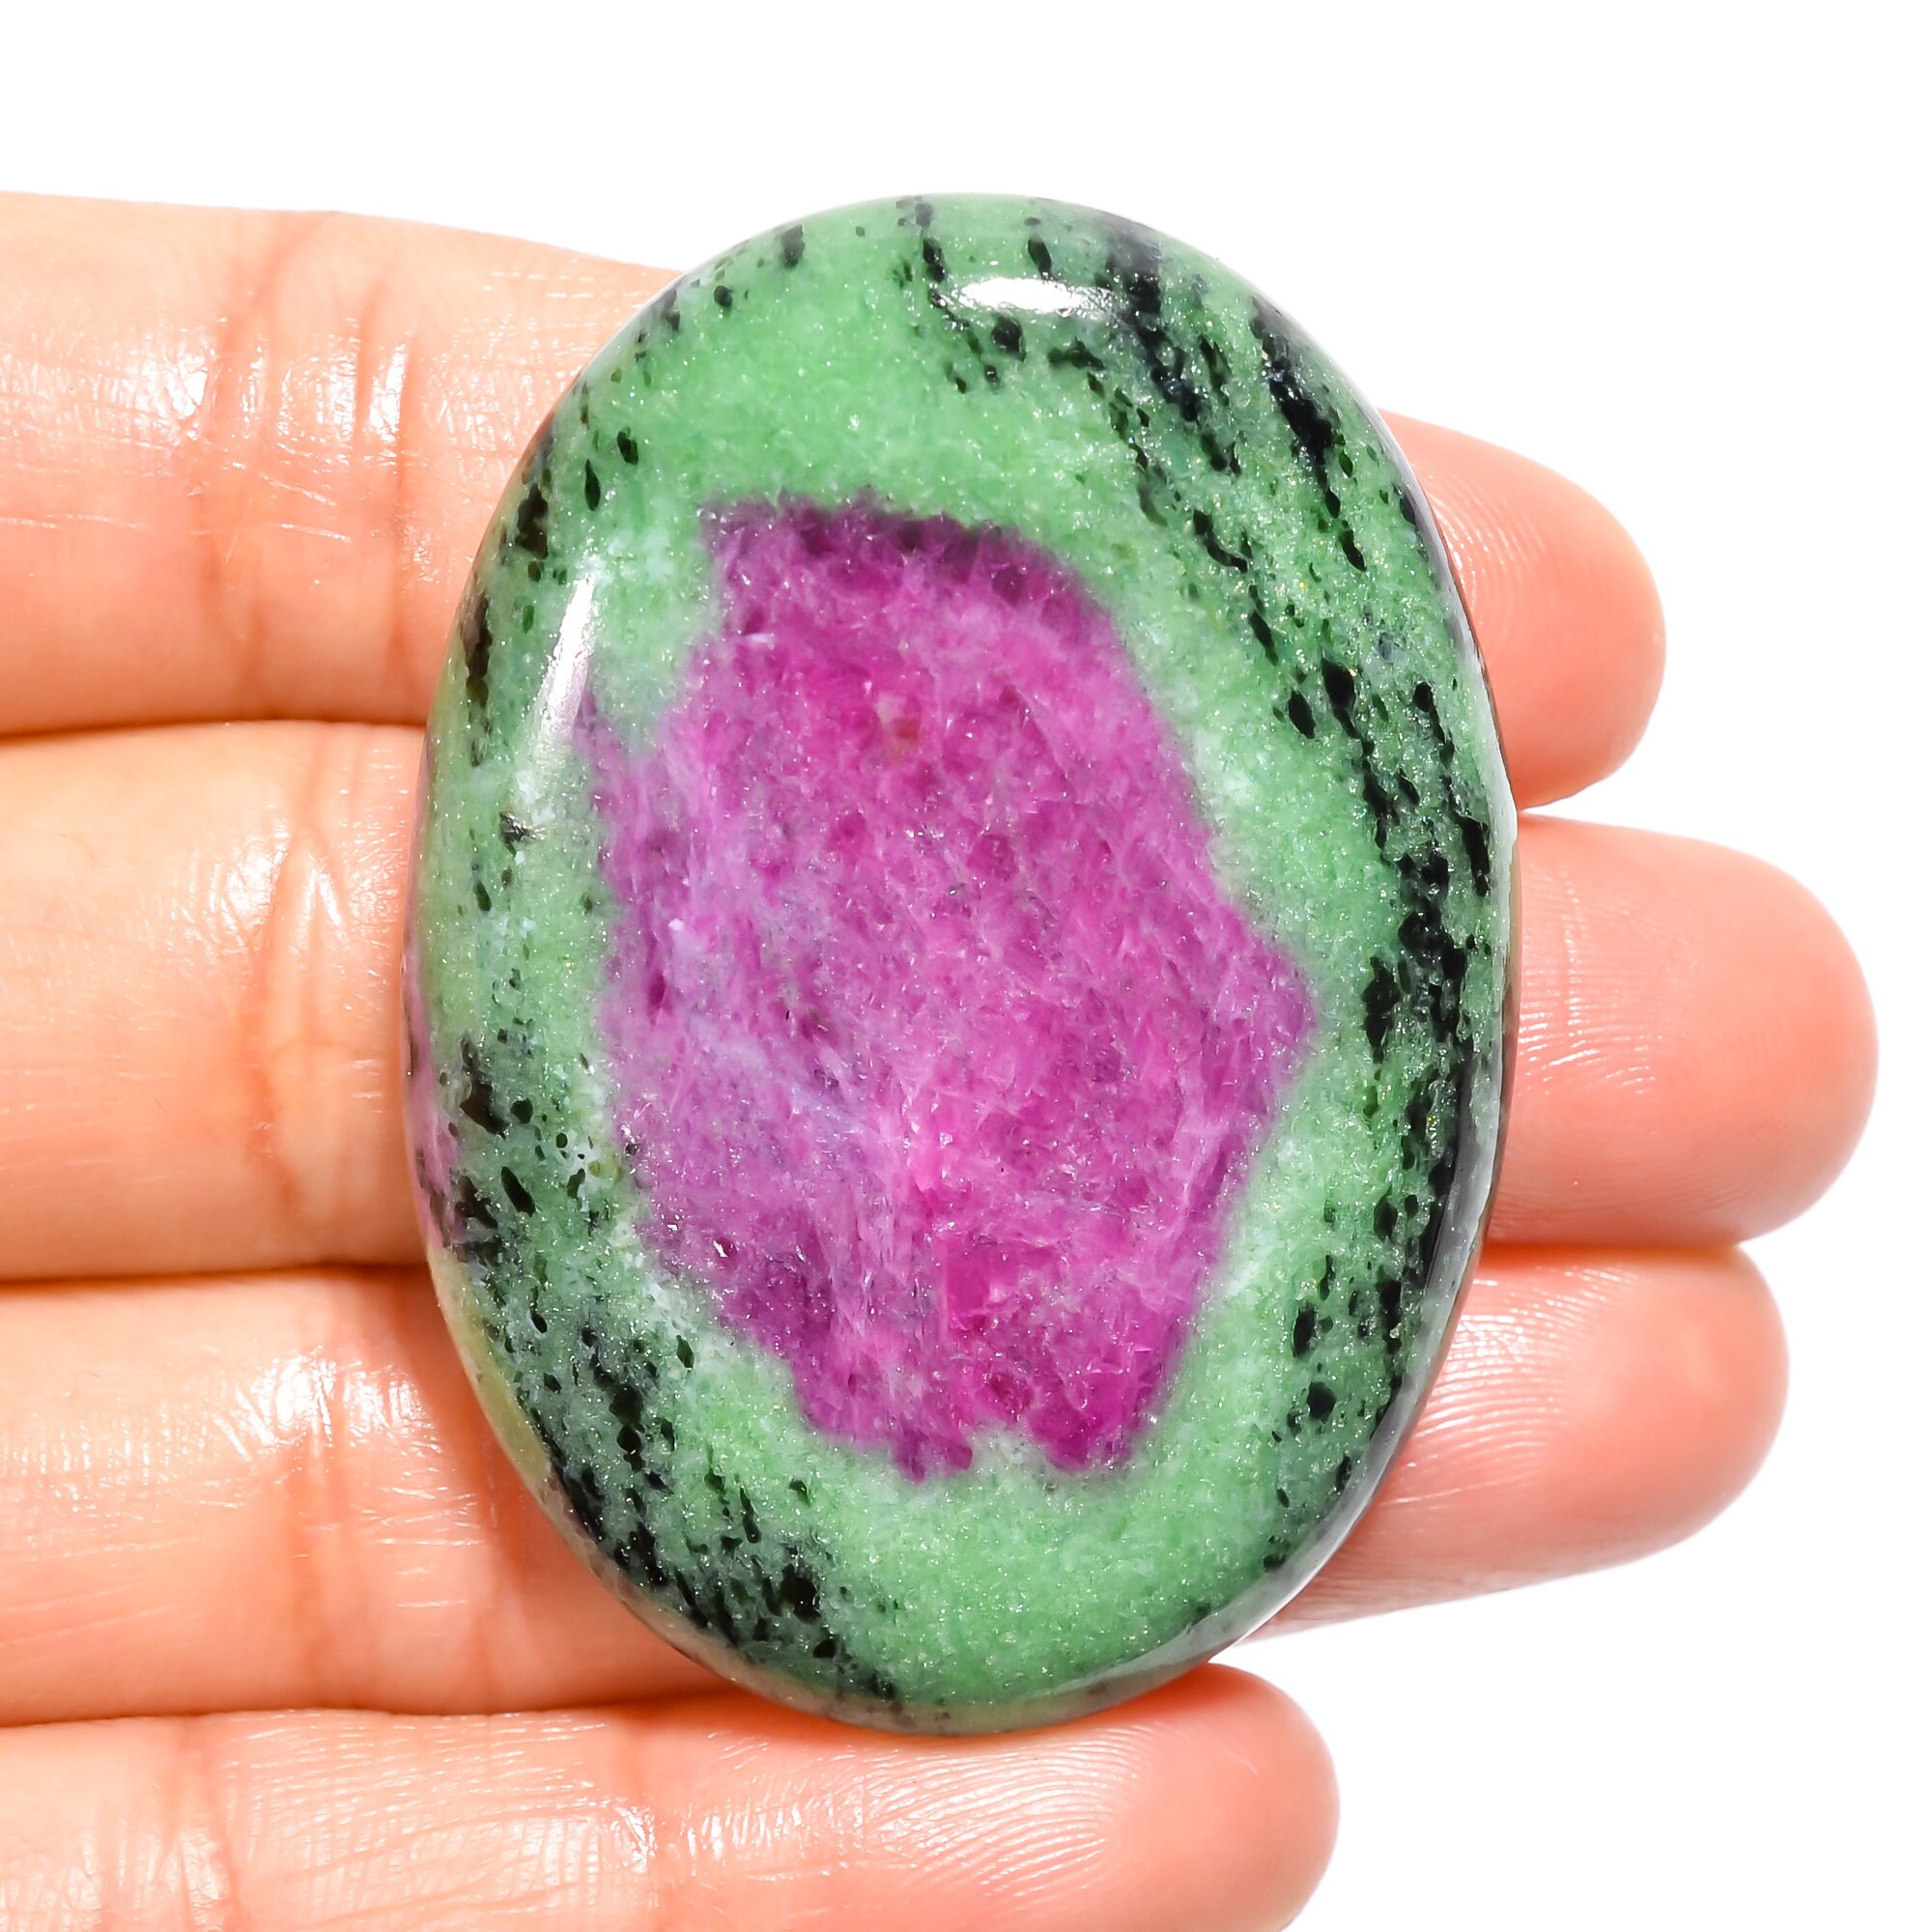 Stunning Top Grade Quality 100% Natural Ruby Zoisite Radiant Shape Cabochon Loose Gemstone For Making Jewelry 48.5 Ct 31X20X6 mm S-730